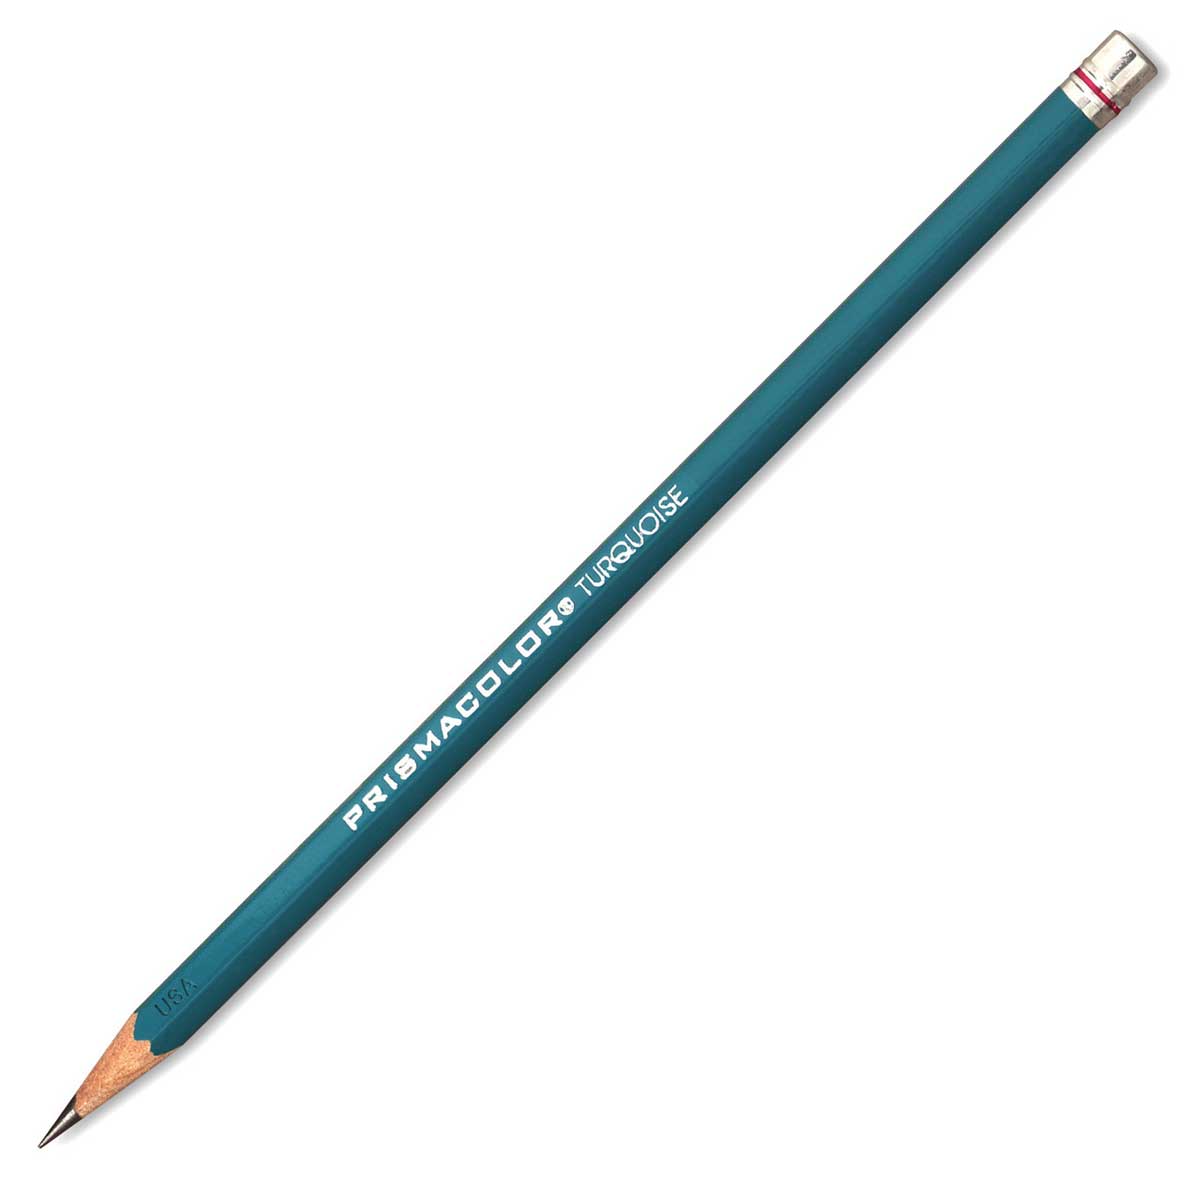 Prismacolor Turquoise Drawing Pencil - 4B